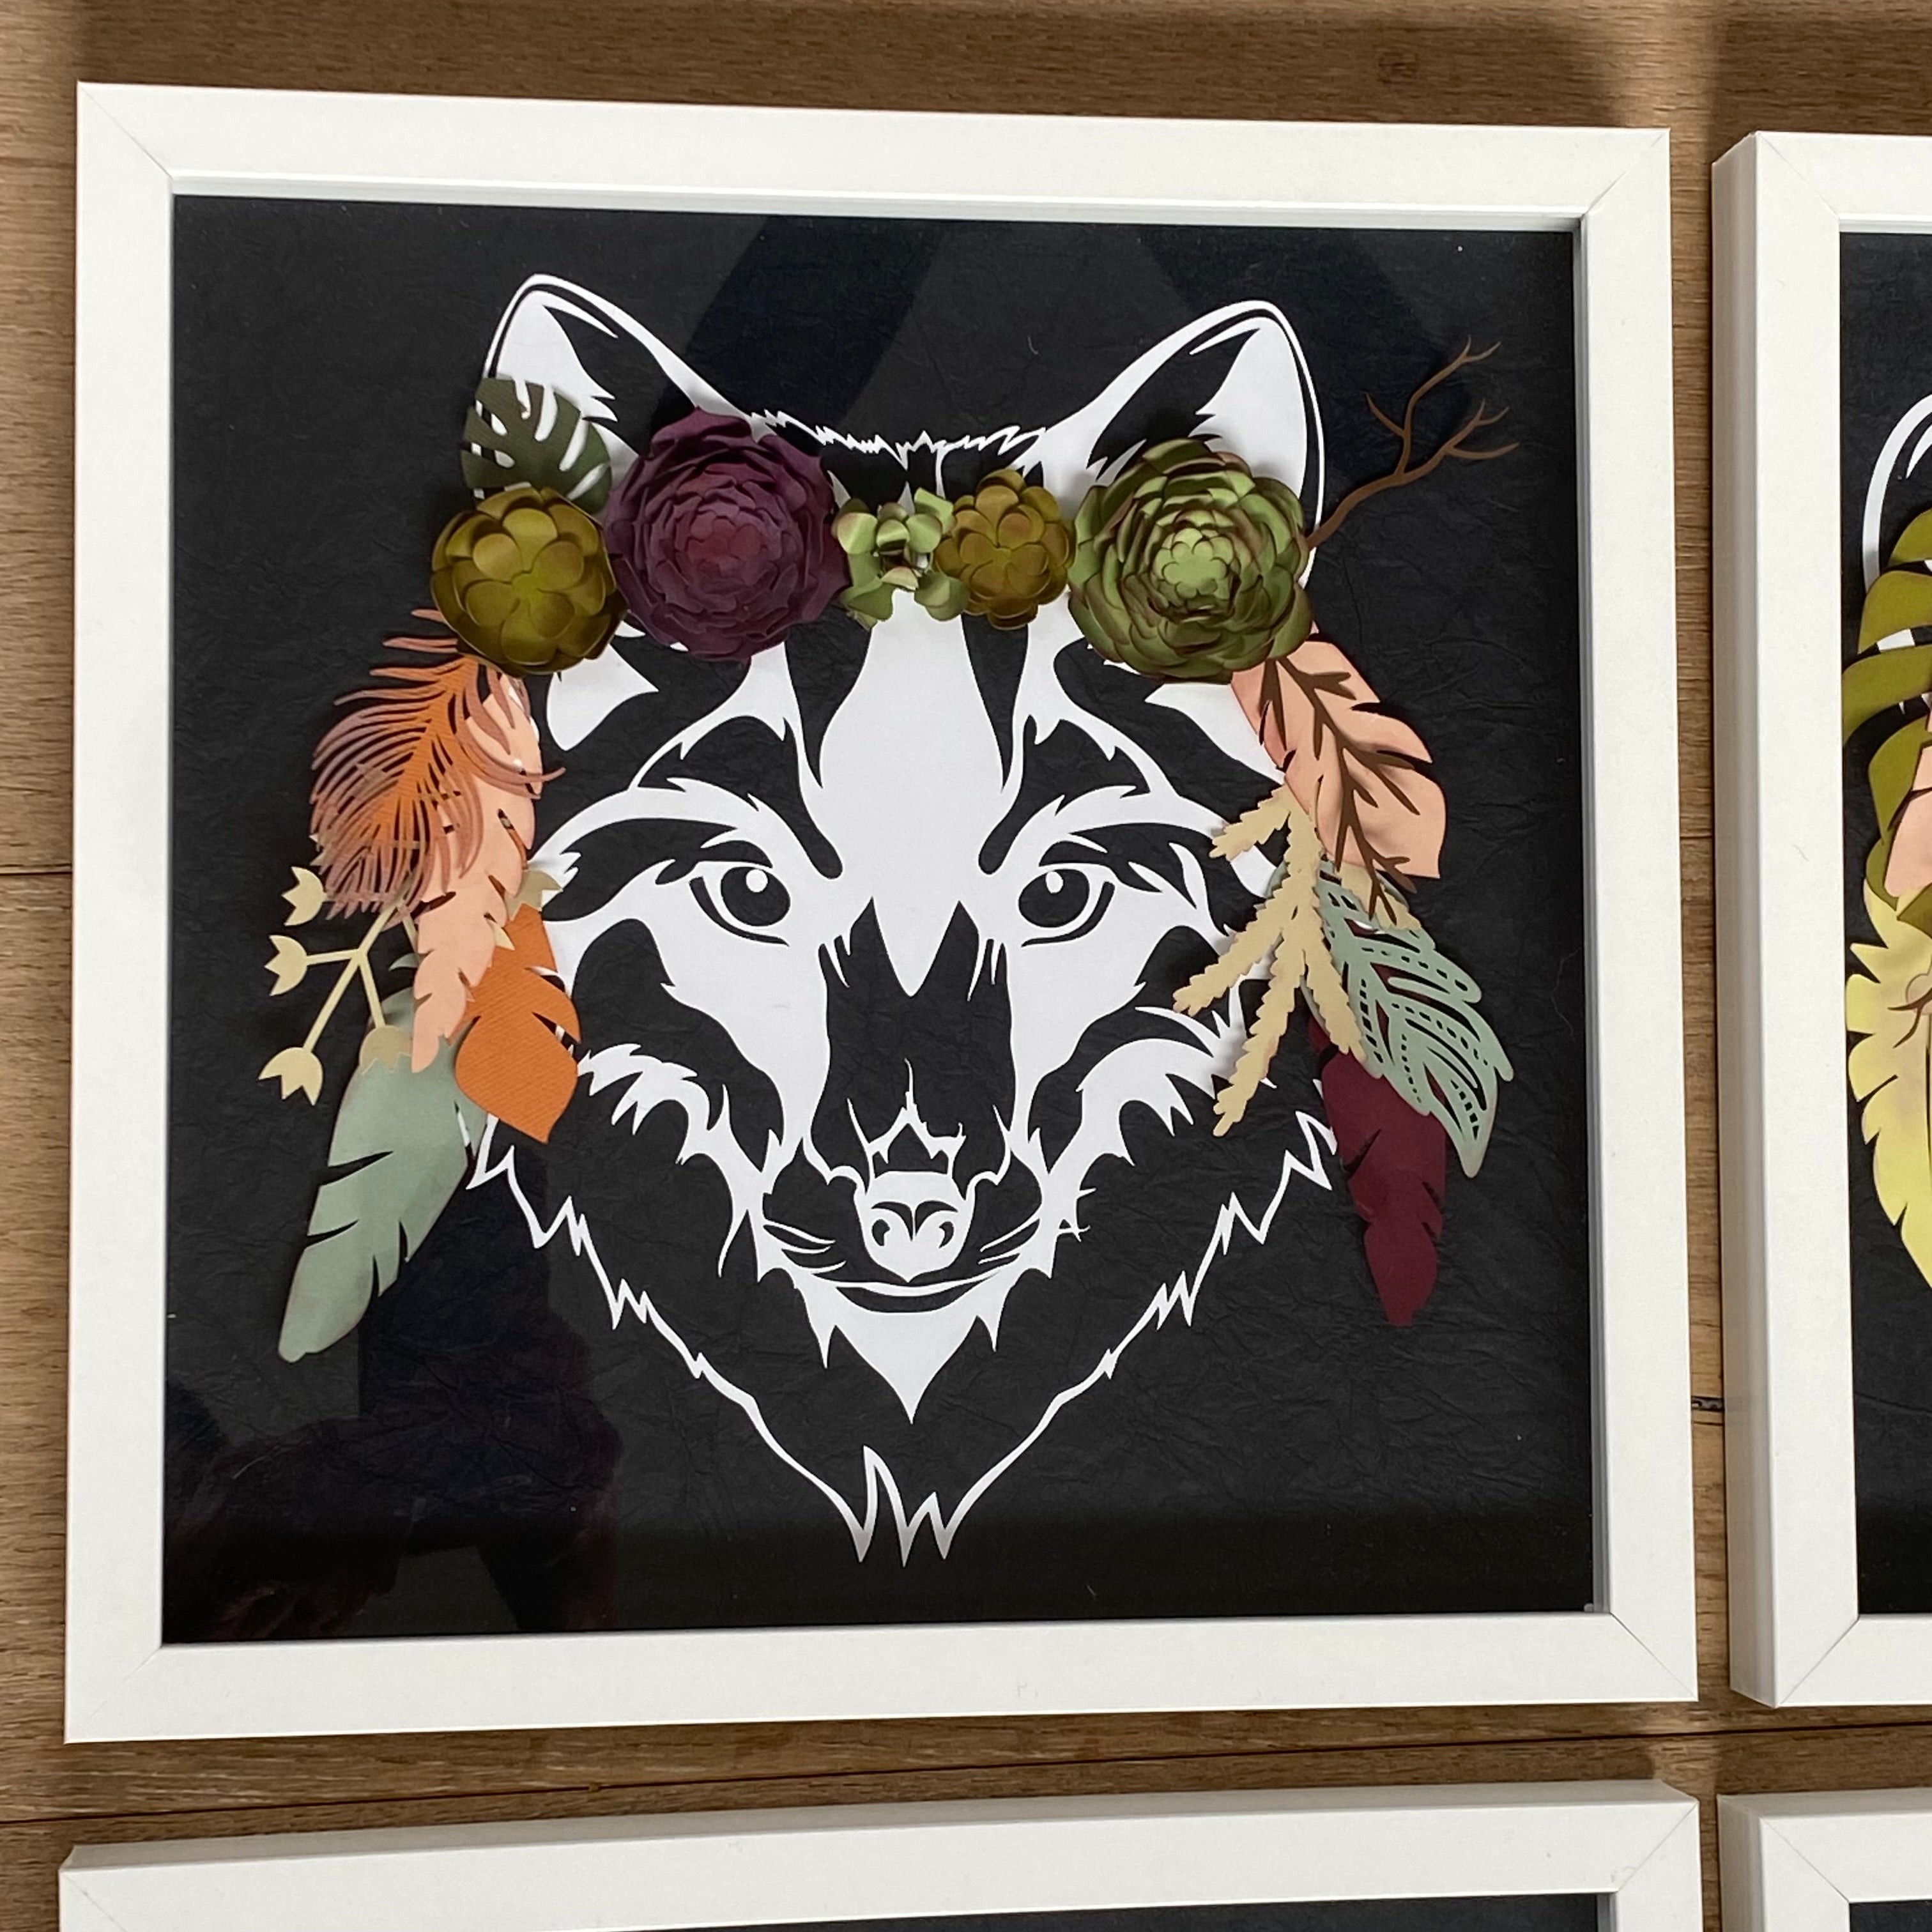 Feathers with the Fox - Paper Art featuring Fox with a Succulent, Feather, and Fern Crown